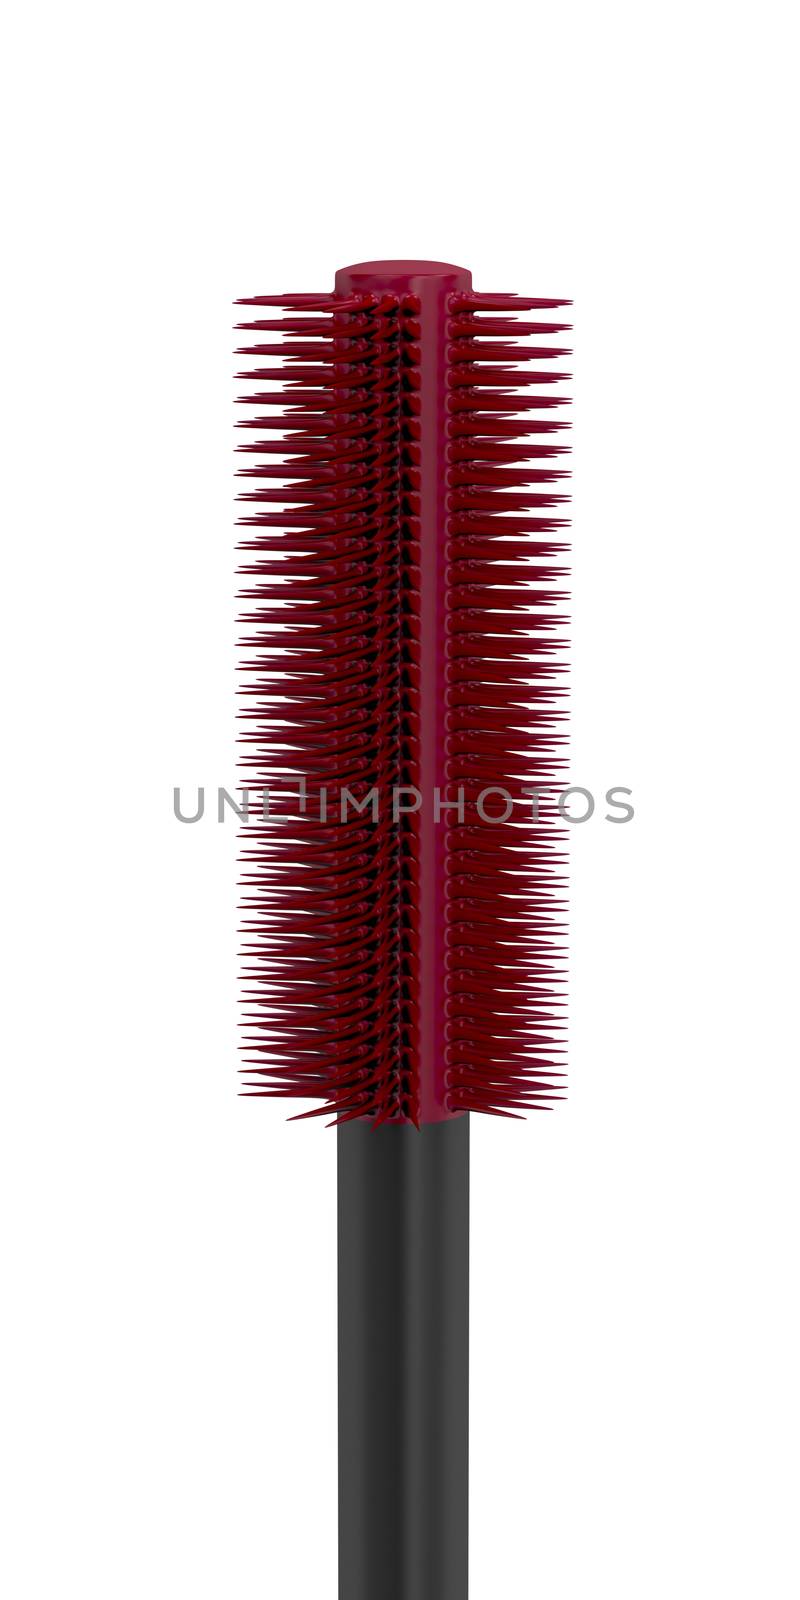 Mascara brush by magraphics